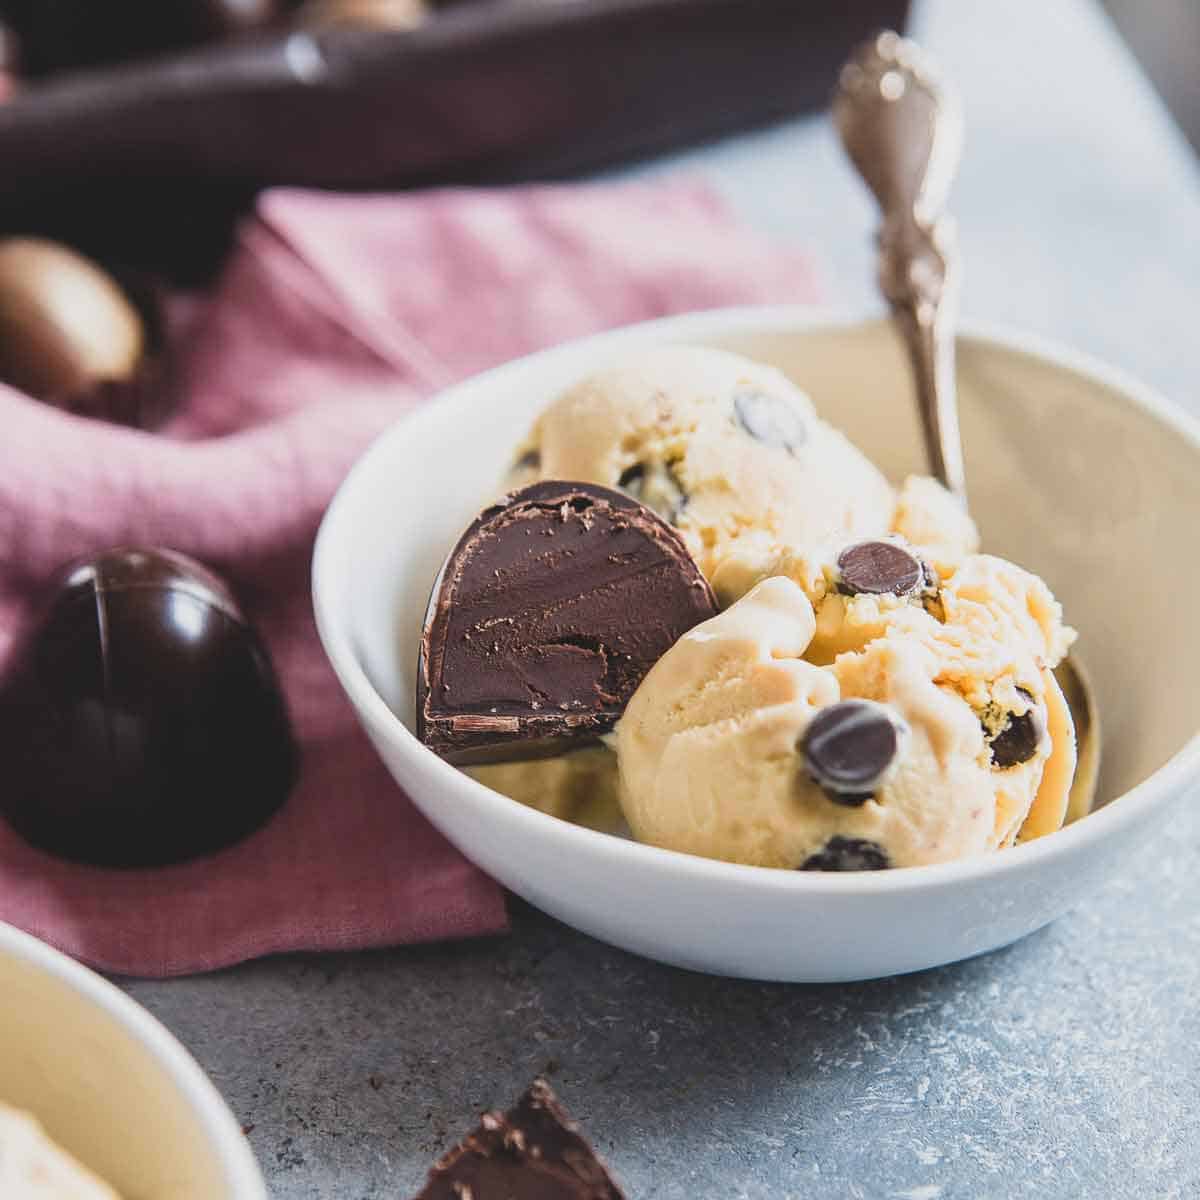 This chocolate chip studded Baileys ice cream is a decadent, creamy and indulgent dessert. 